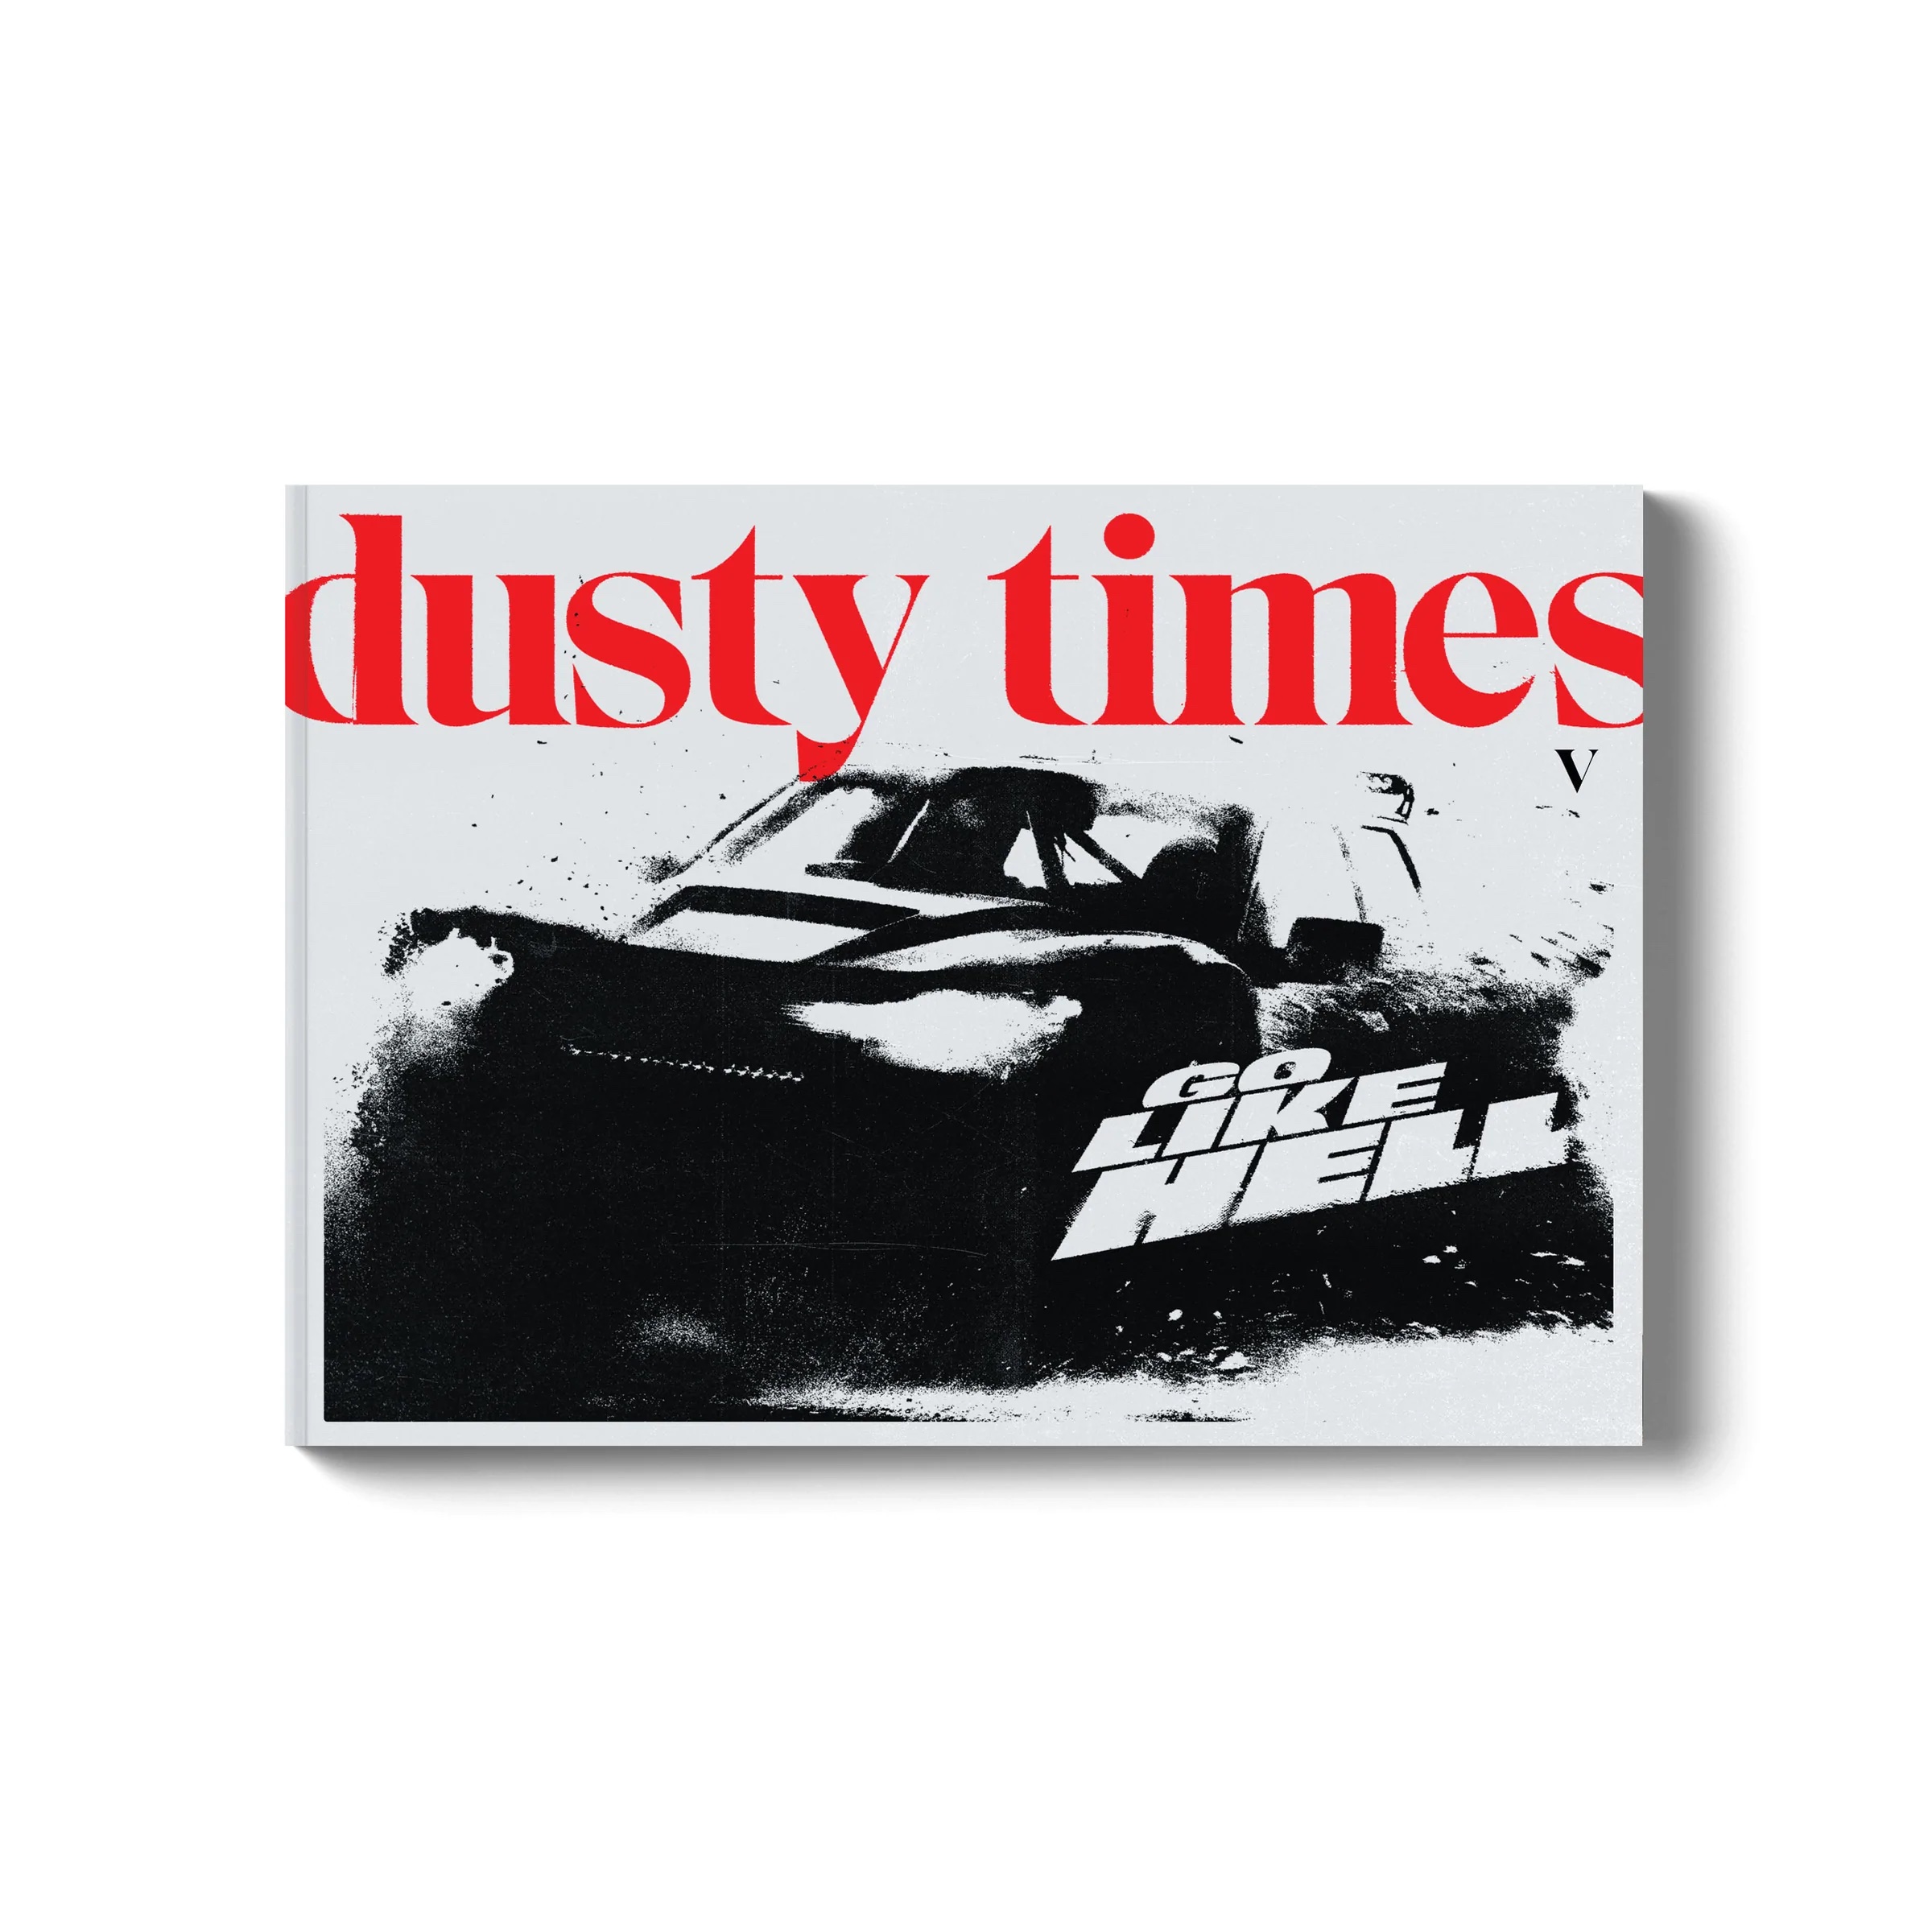 New book “Dusty Times, Issue 05 - Go Like Hell” by Custom Wheel House is released, a collection of articles and beautiful photography for the off-road motorsports and adventure travel enthusiast